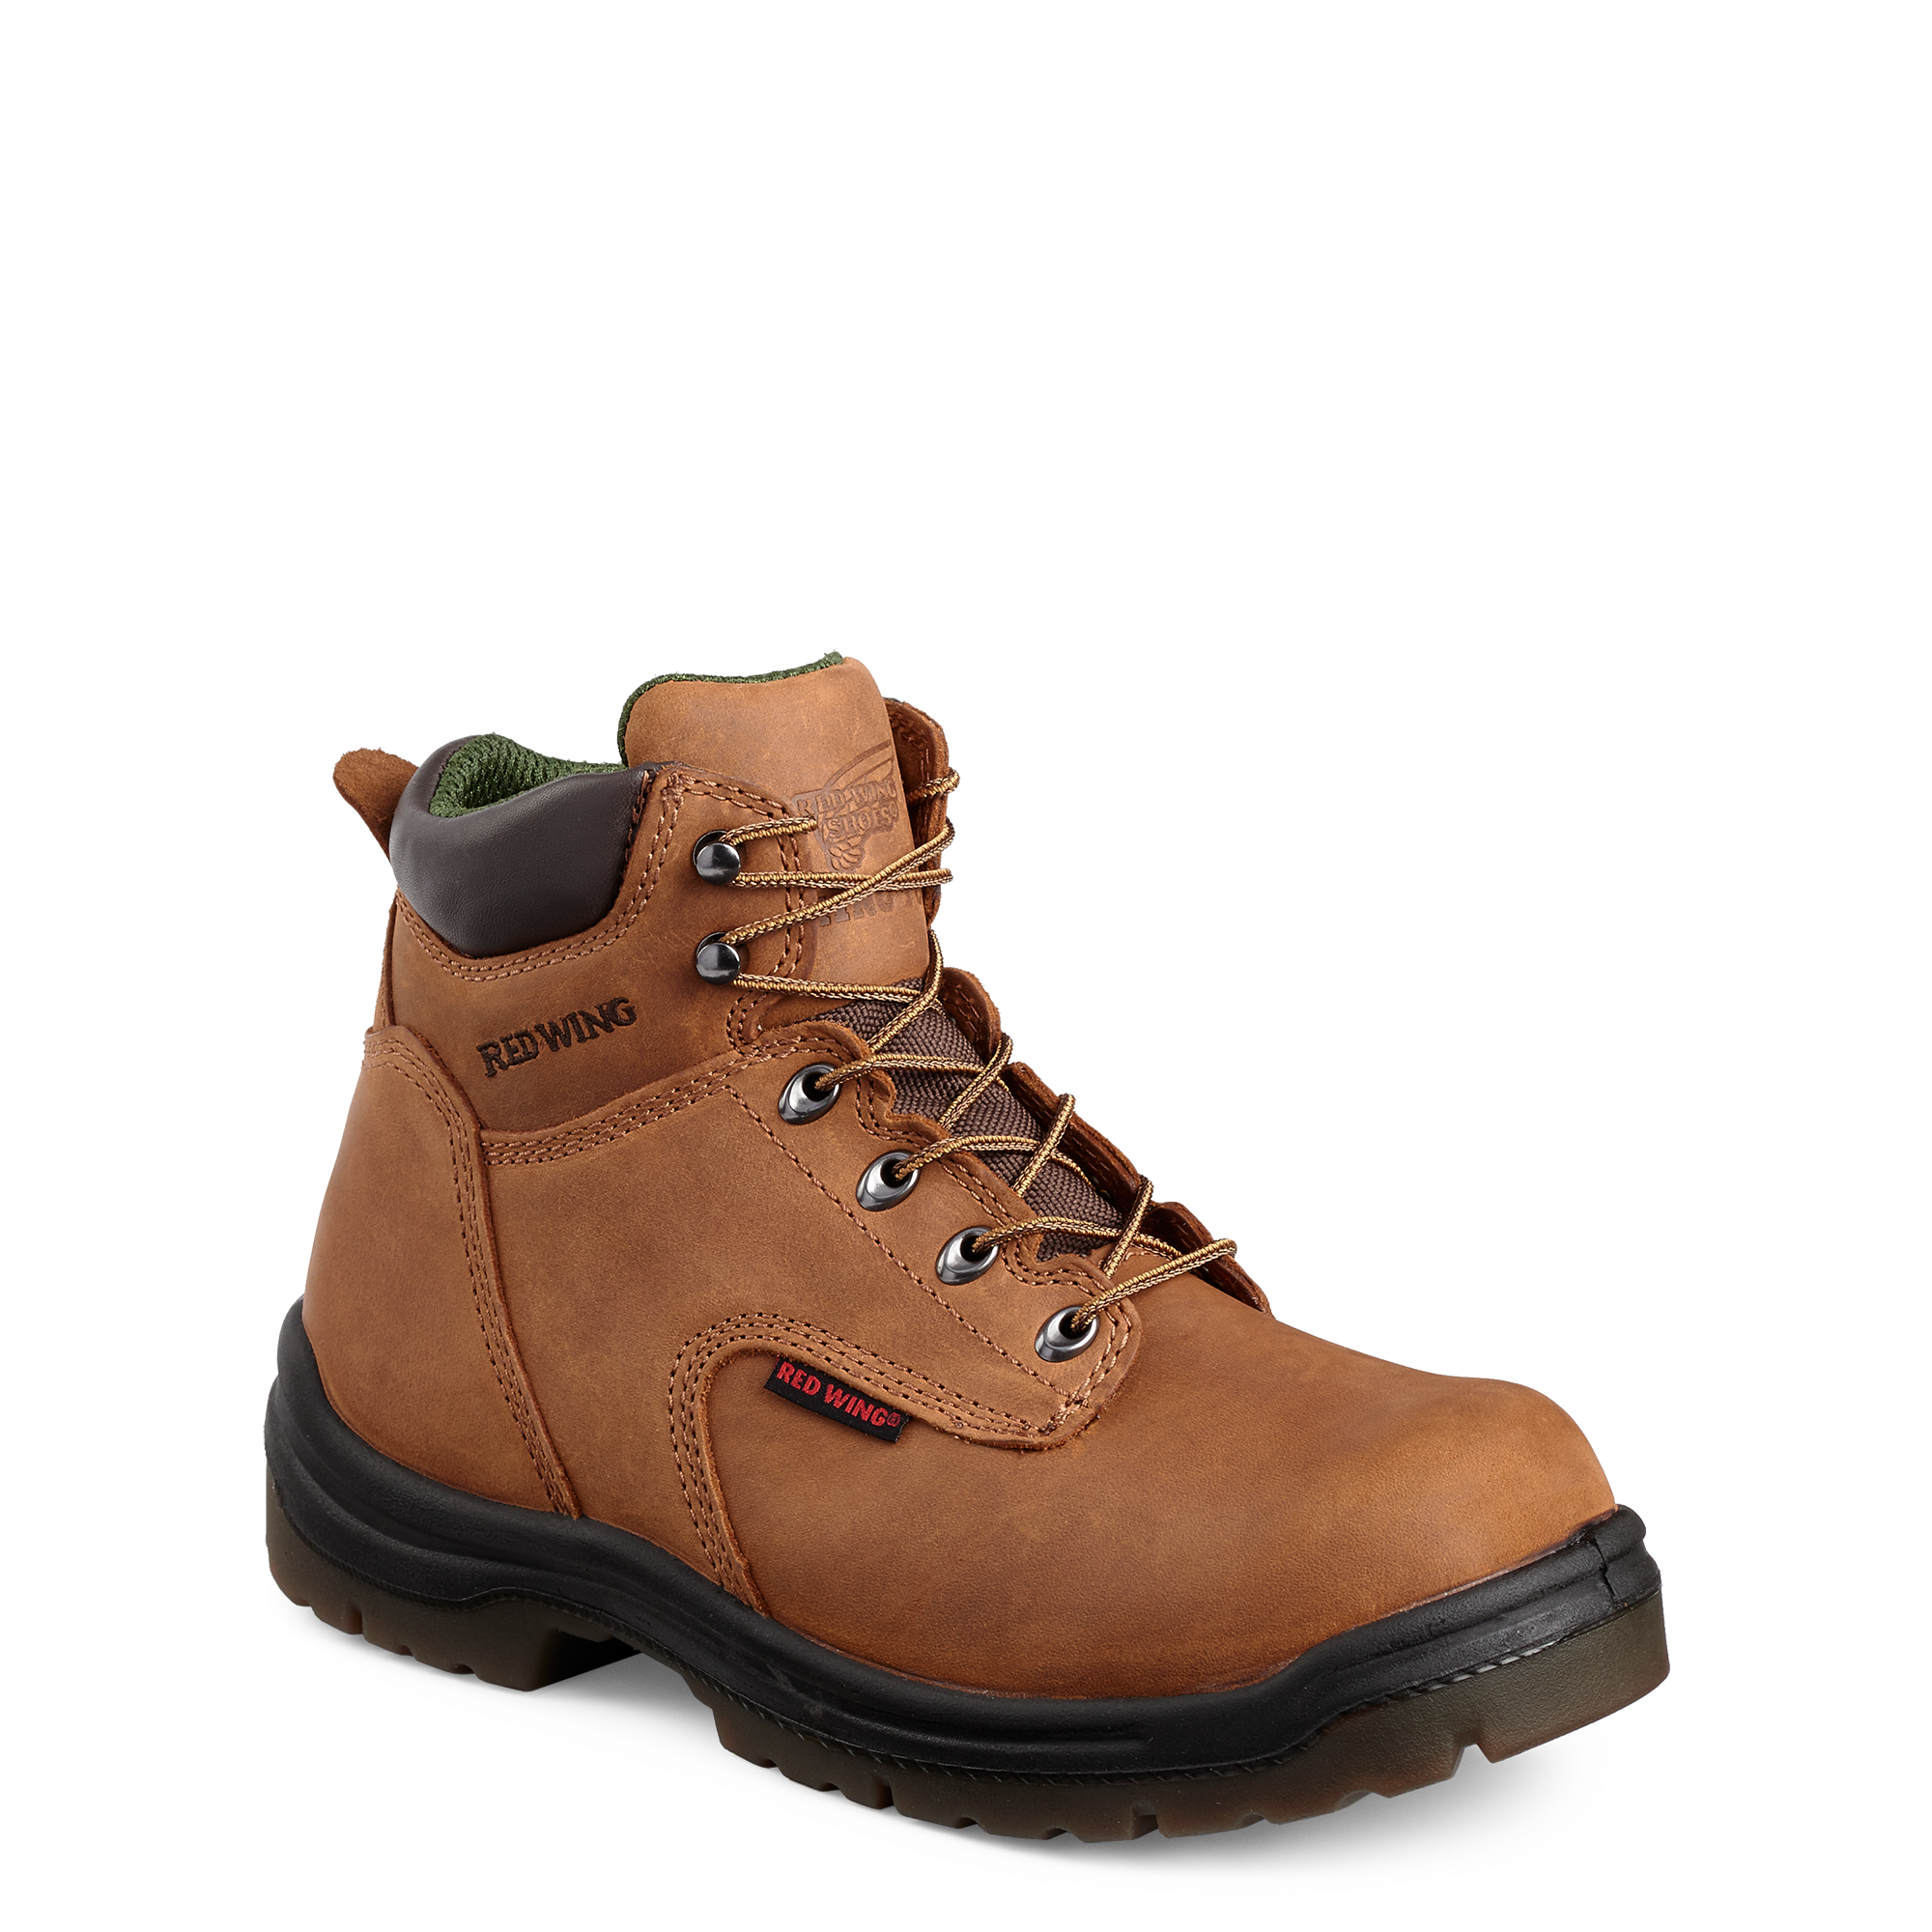 2235, Red Wing 2235 Work Boots, Red Wing 2235 – Baker Shoes